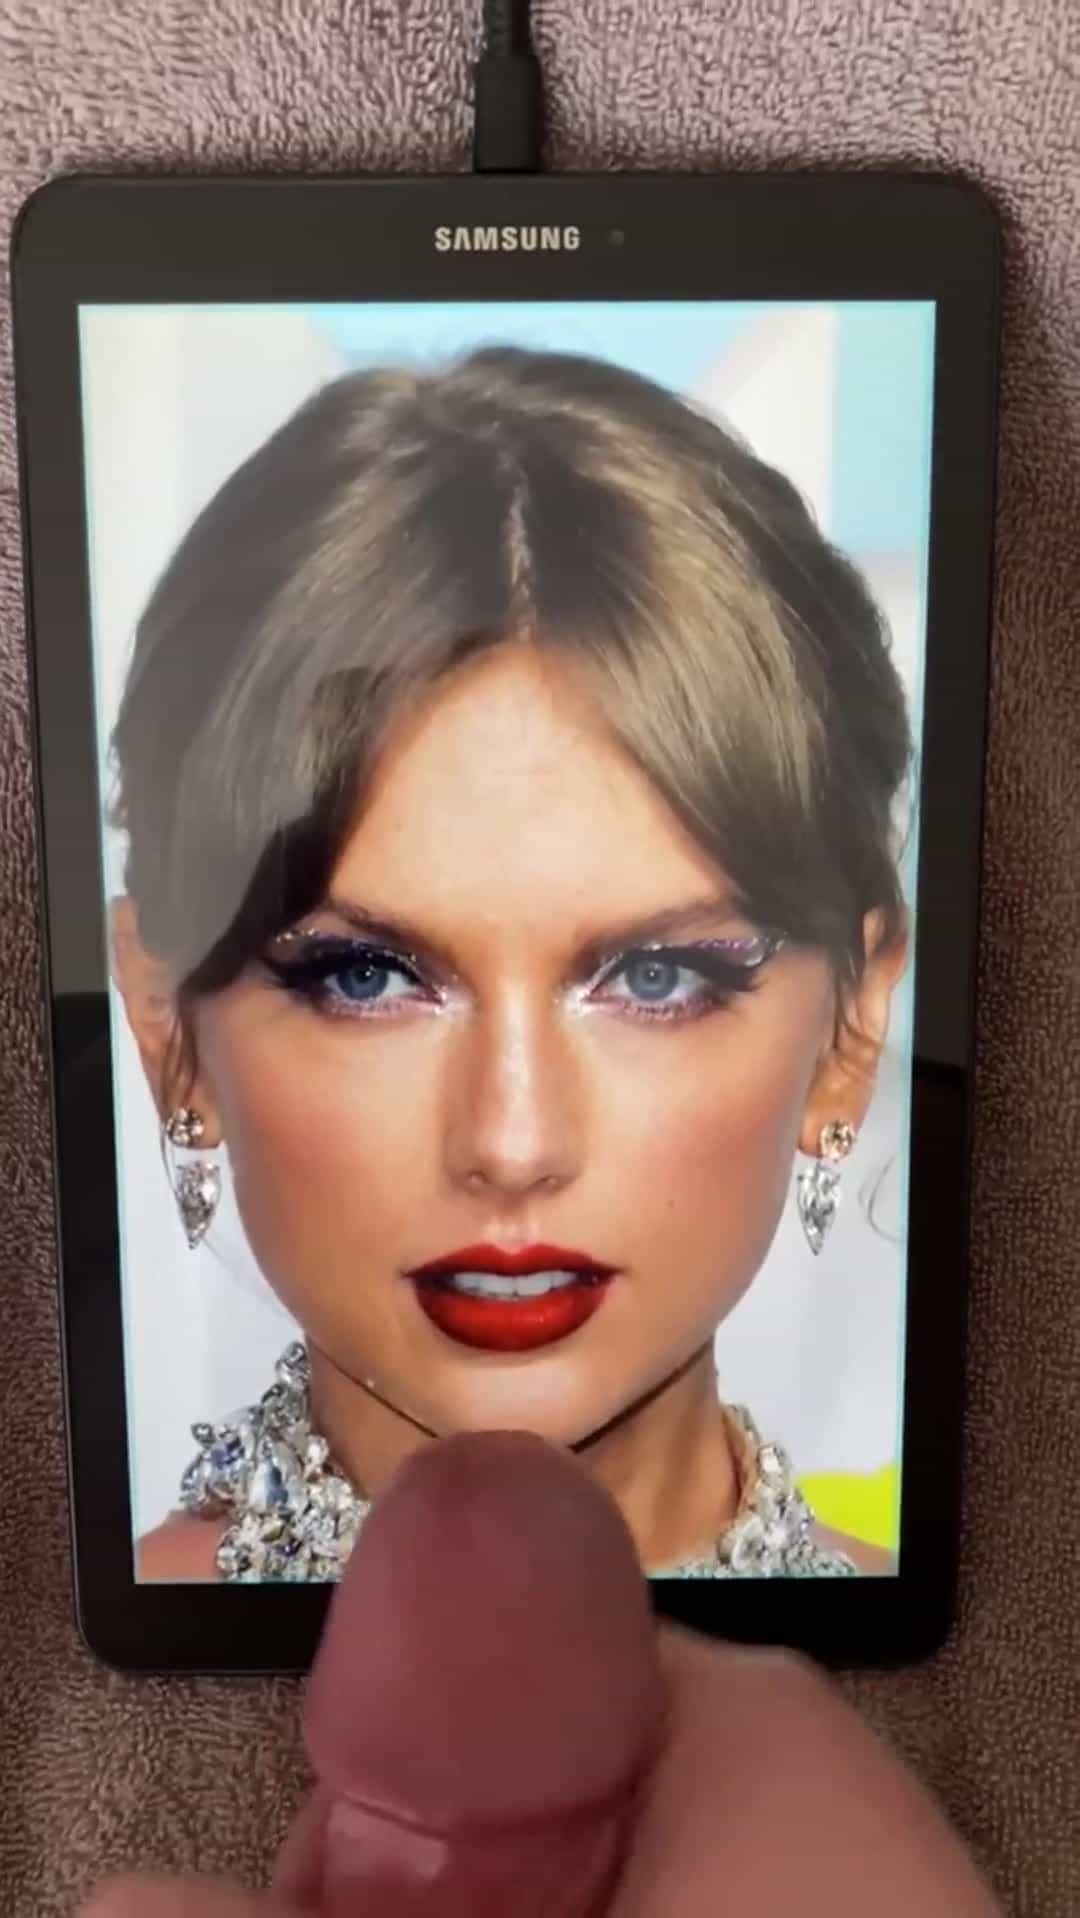 Taylor Swift’s face drives me crazy 